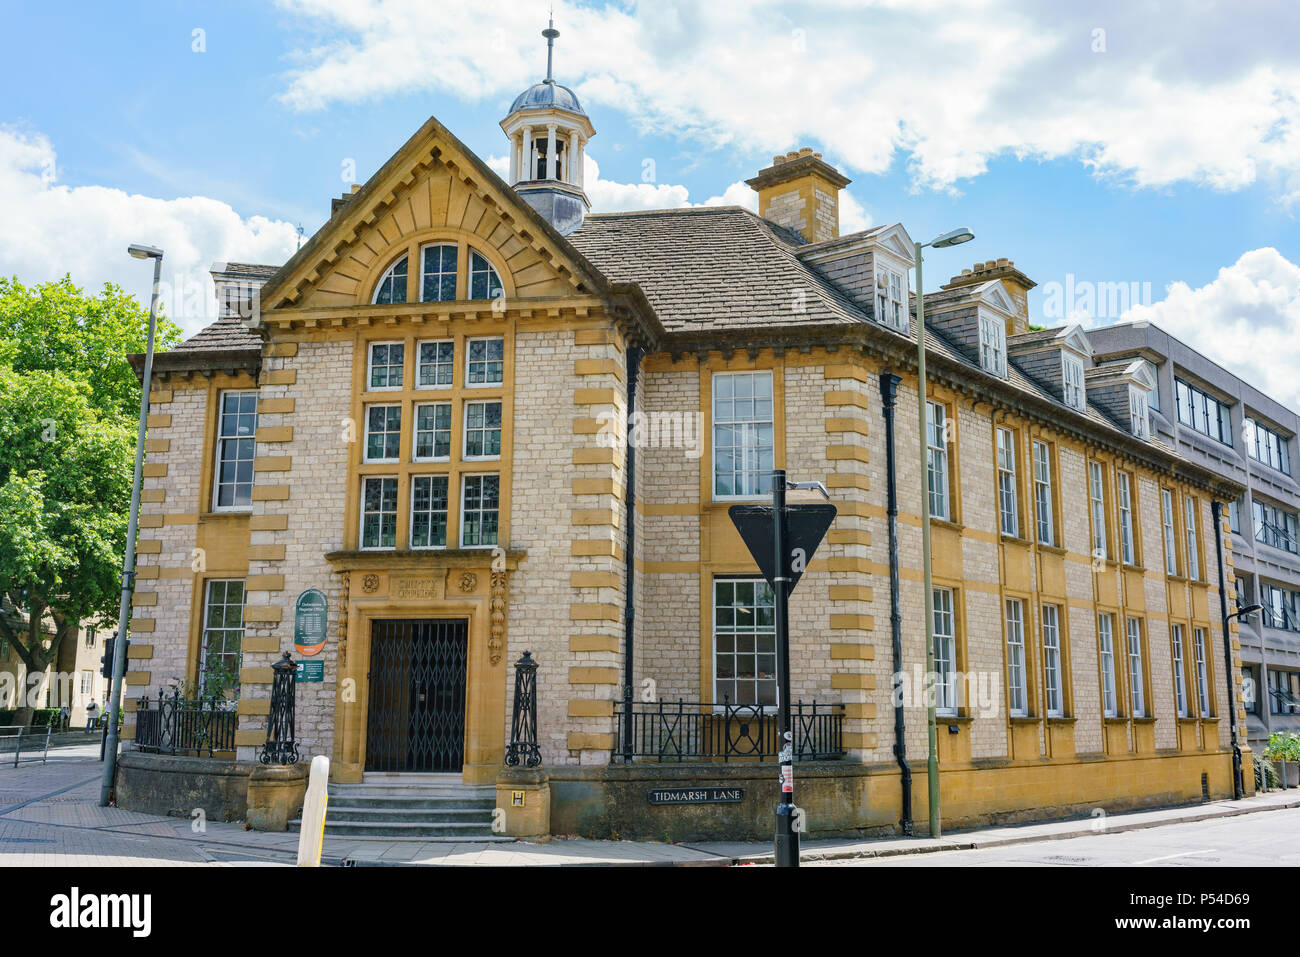 Oxford, JUL 9: Exterior view of the Oxfordshire Register Office on JUL 9, 2017 at Oxford, United Kingdom Stock Photo